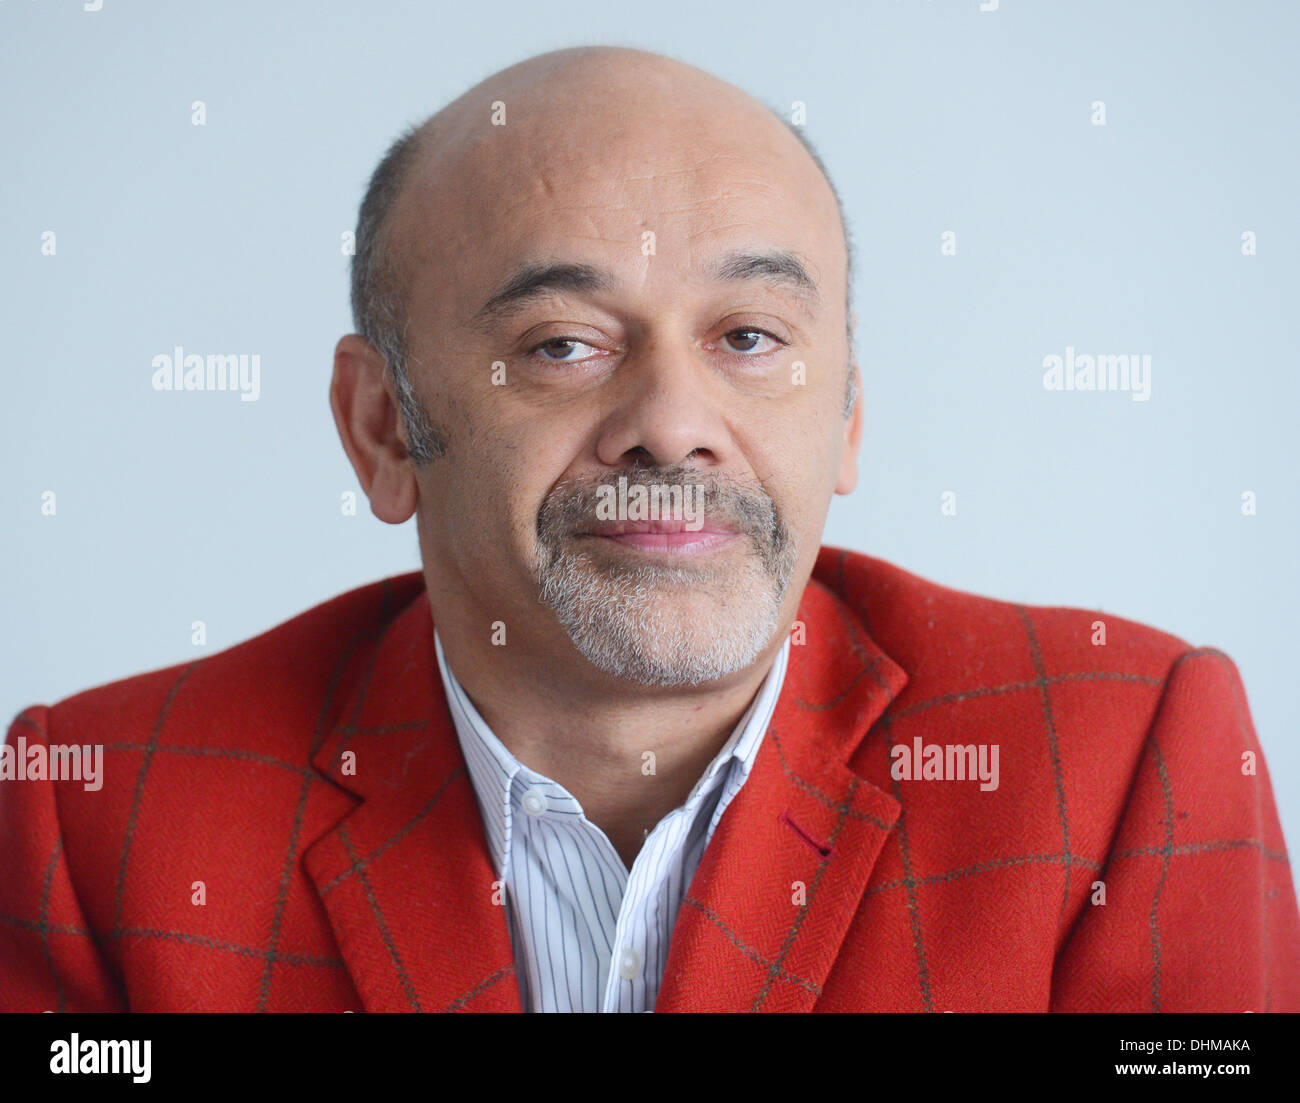 French footwear designer Christian Louboutin poses on the red carpet for an  opening event for the exhibition Louis Vuitton Series 2 ¨C Past, Present  Stock Photo - Alamy